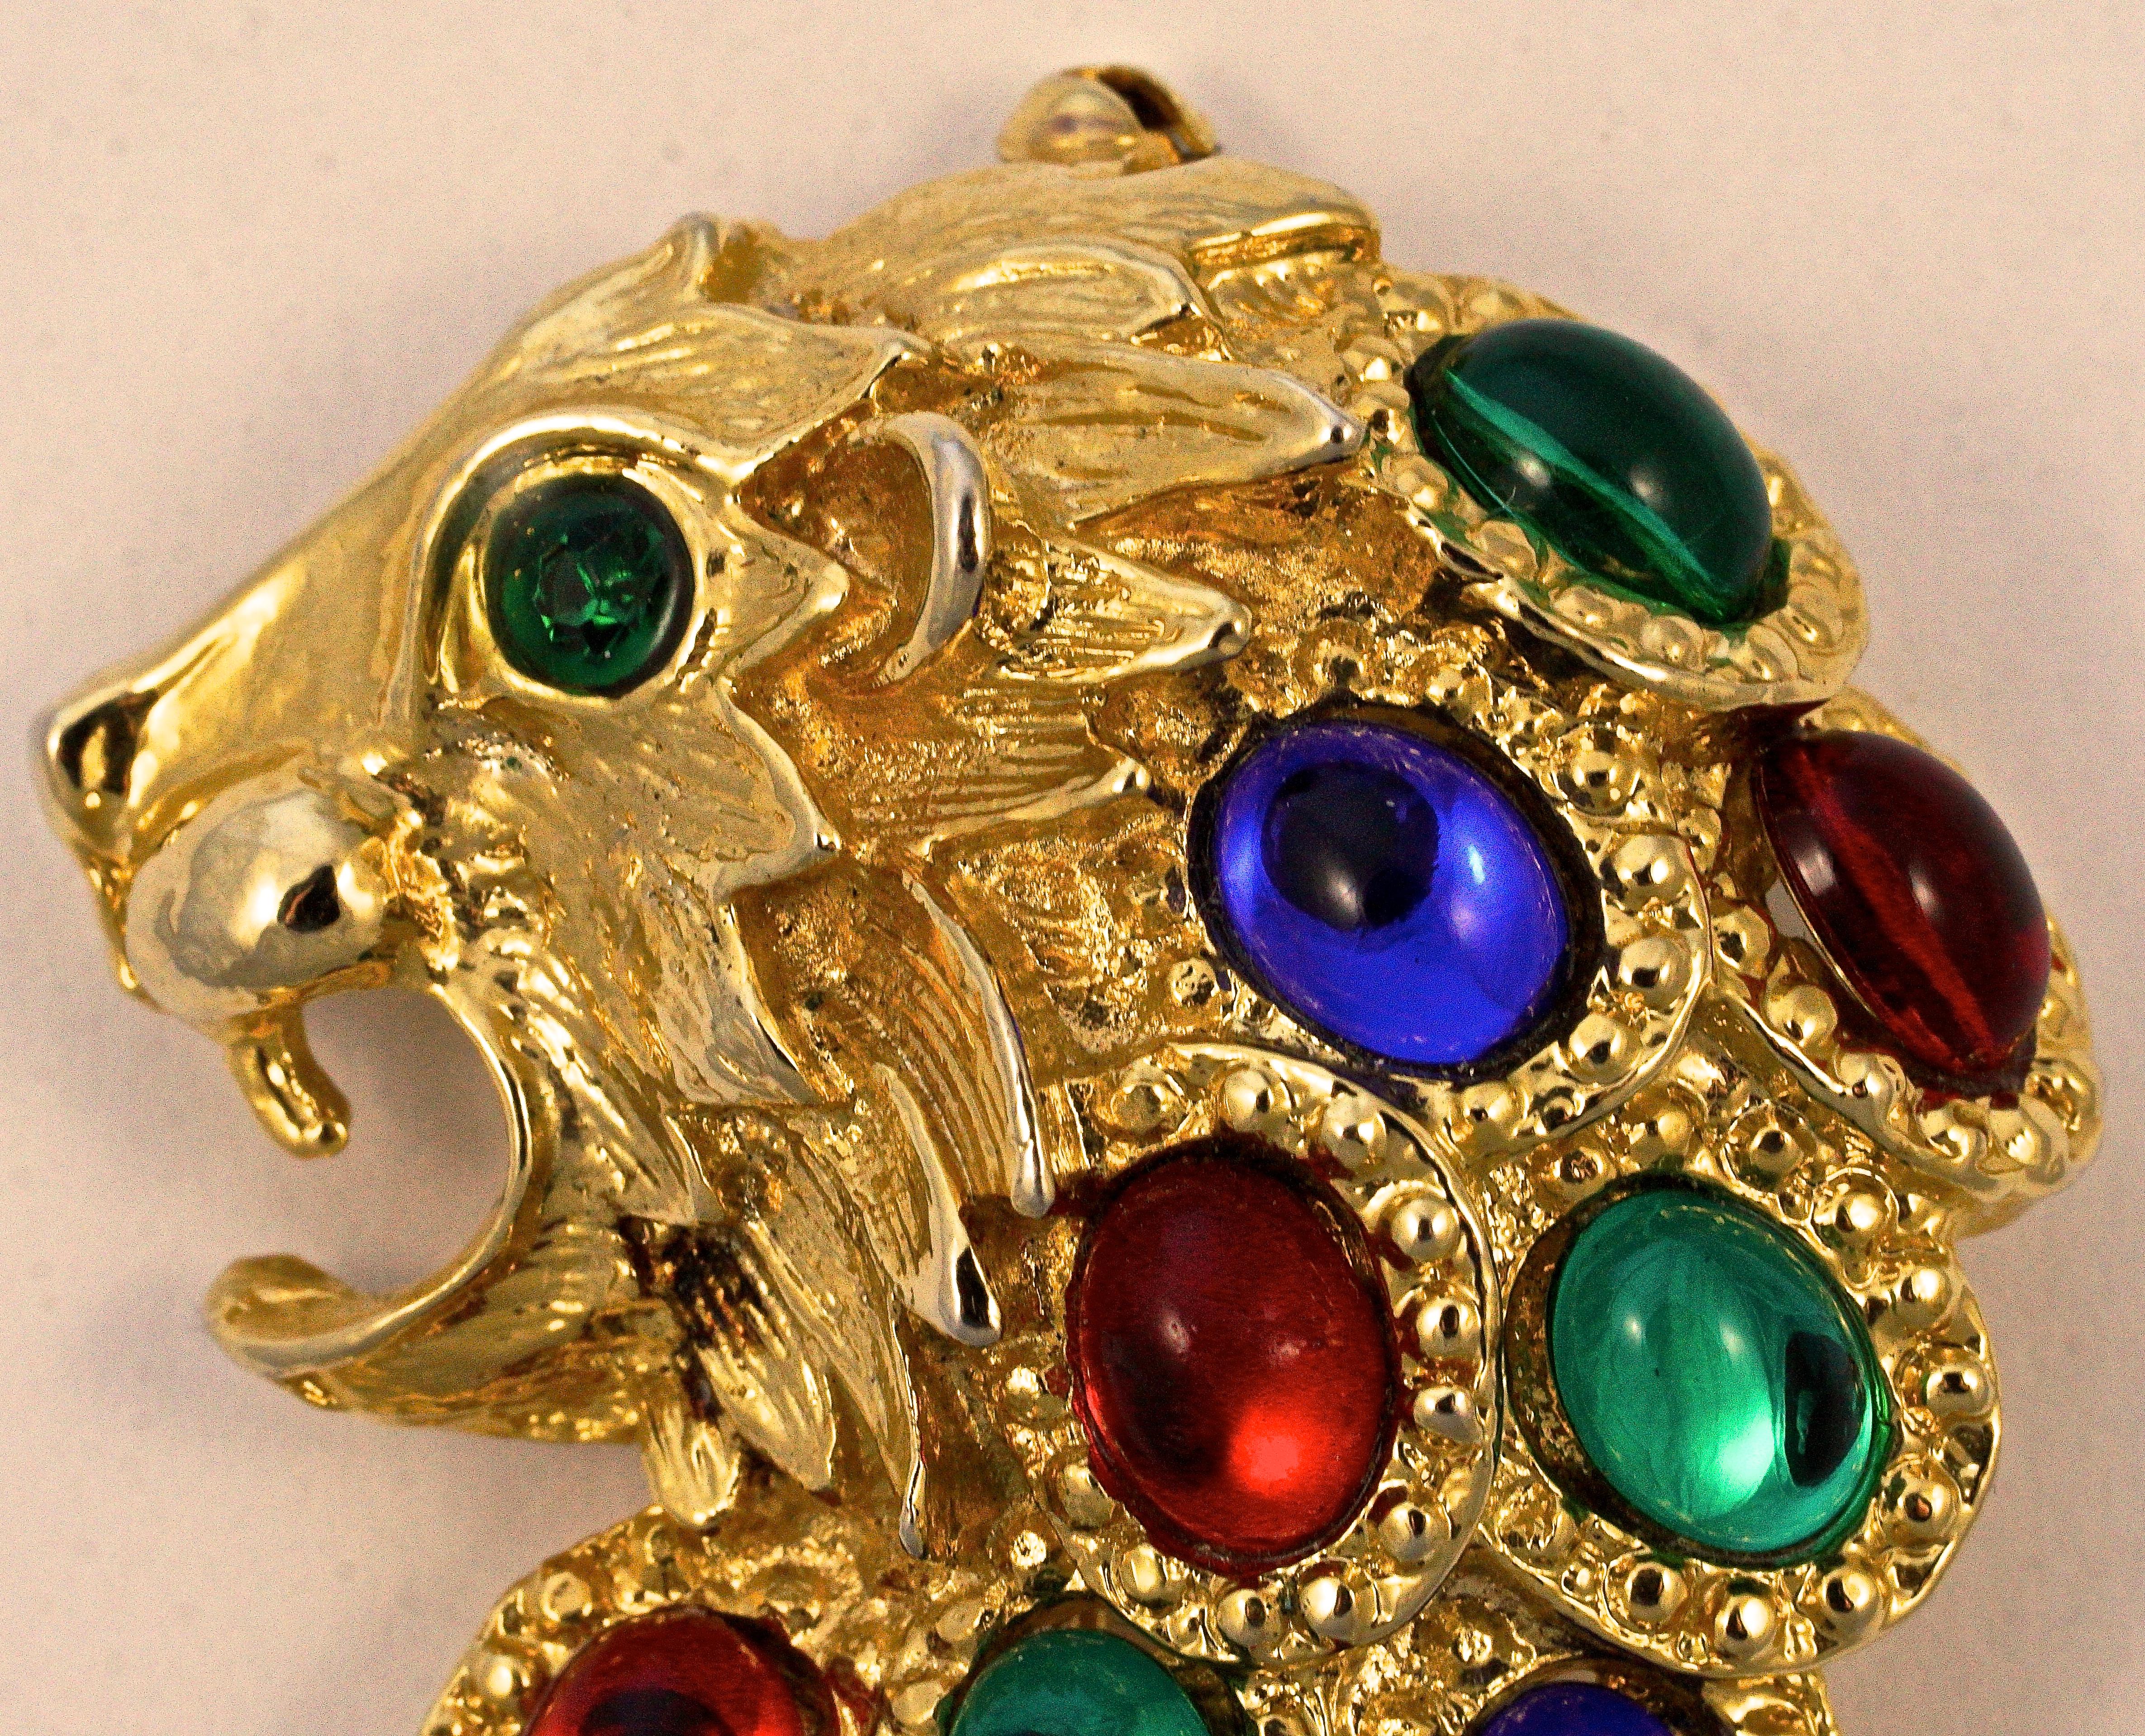 Vintage gold plated and textured lion brooch with green eyes, embellished with blue, red and green oval stones. Measuring length 7.5cm / 3 inches by maximum 5.3cm / 2.08 inches.

Large and beautiful, this lion statement brooch is sure to attract